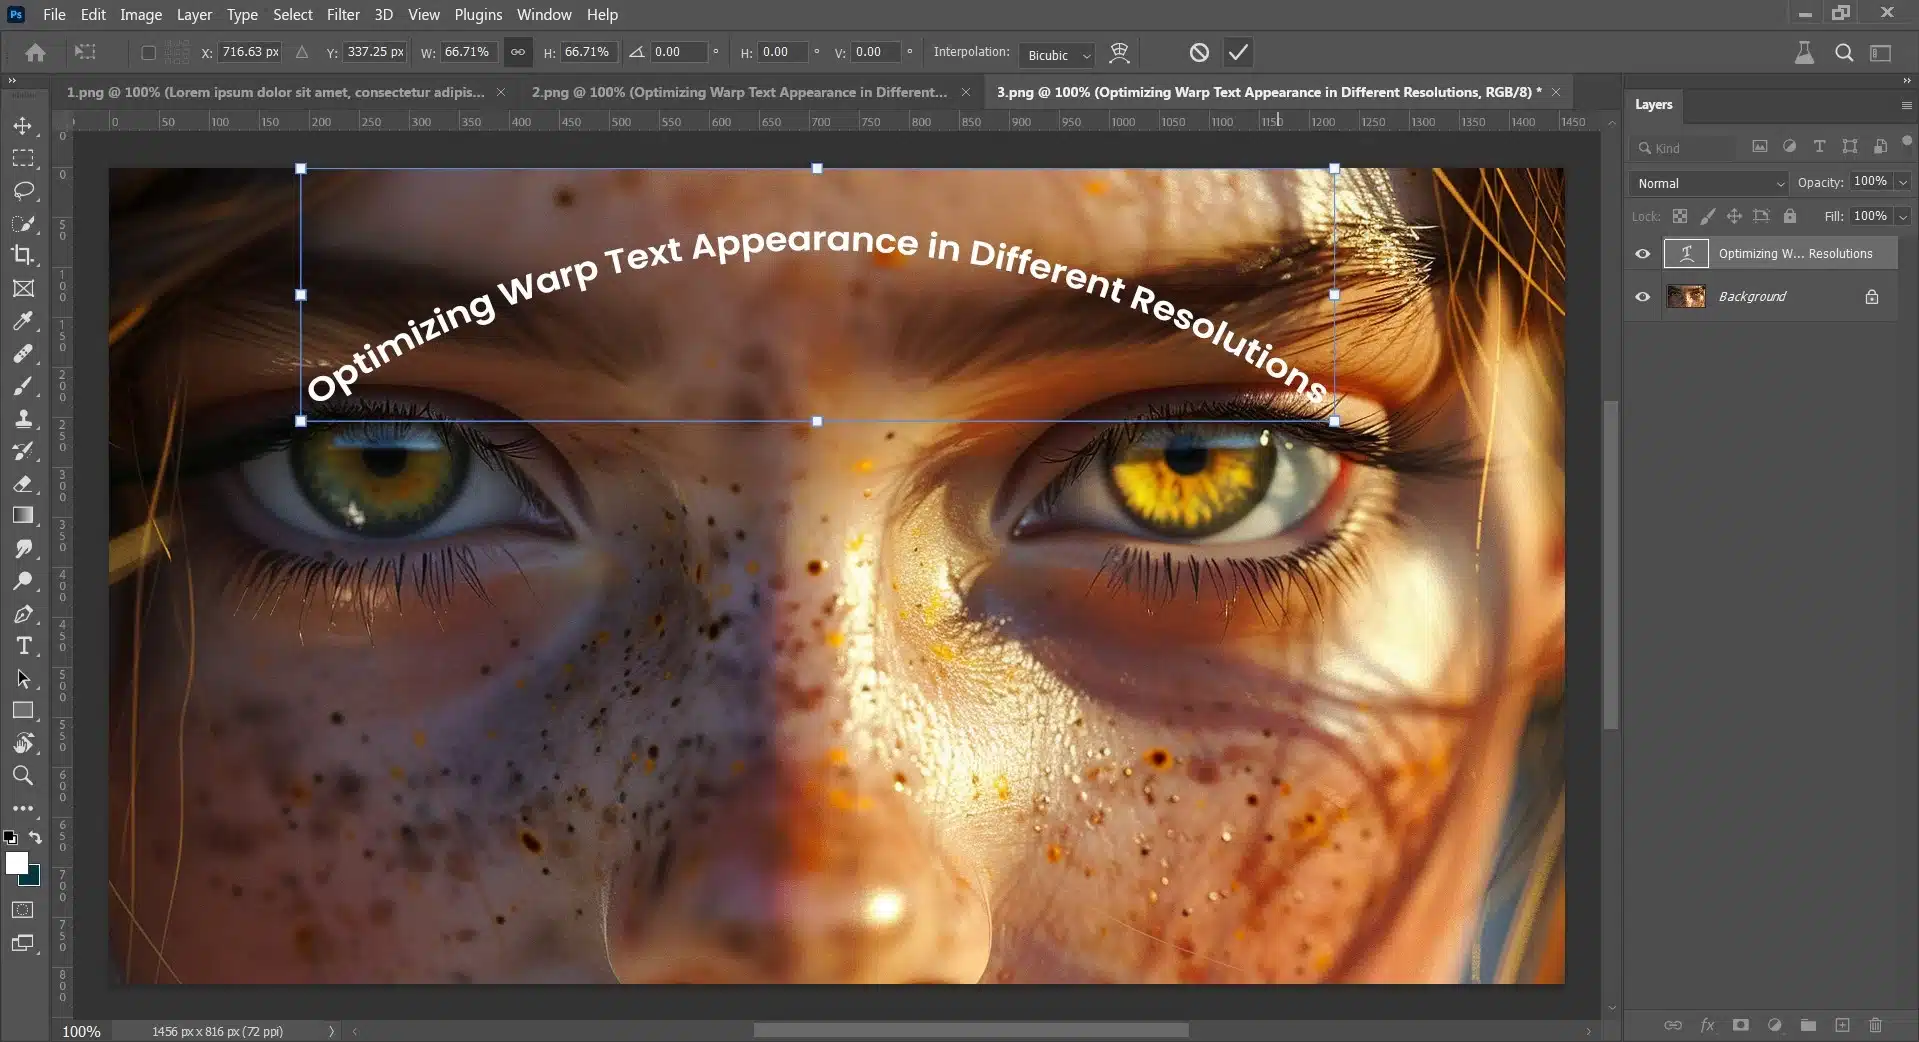 : Screenshot of a graphic design software interface showing the text "Optimizing Warp Text Appearance in Different Resolutions" being edited over an ultra-high-resolution image of a young girl's face, focusing closely on her eyes.